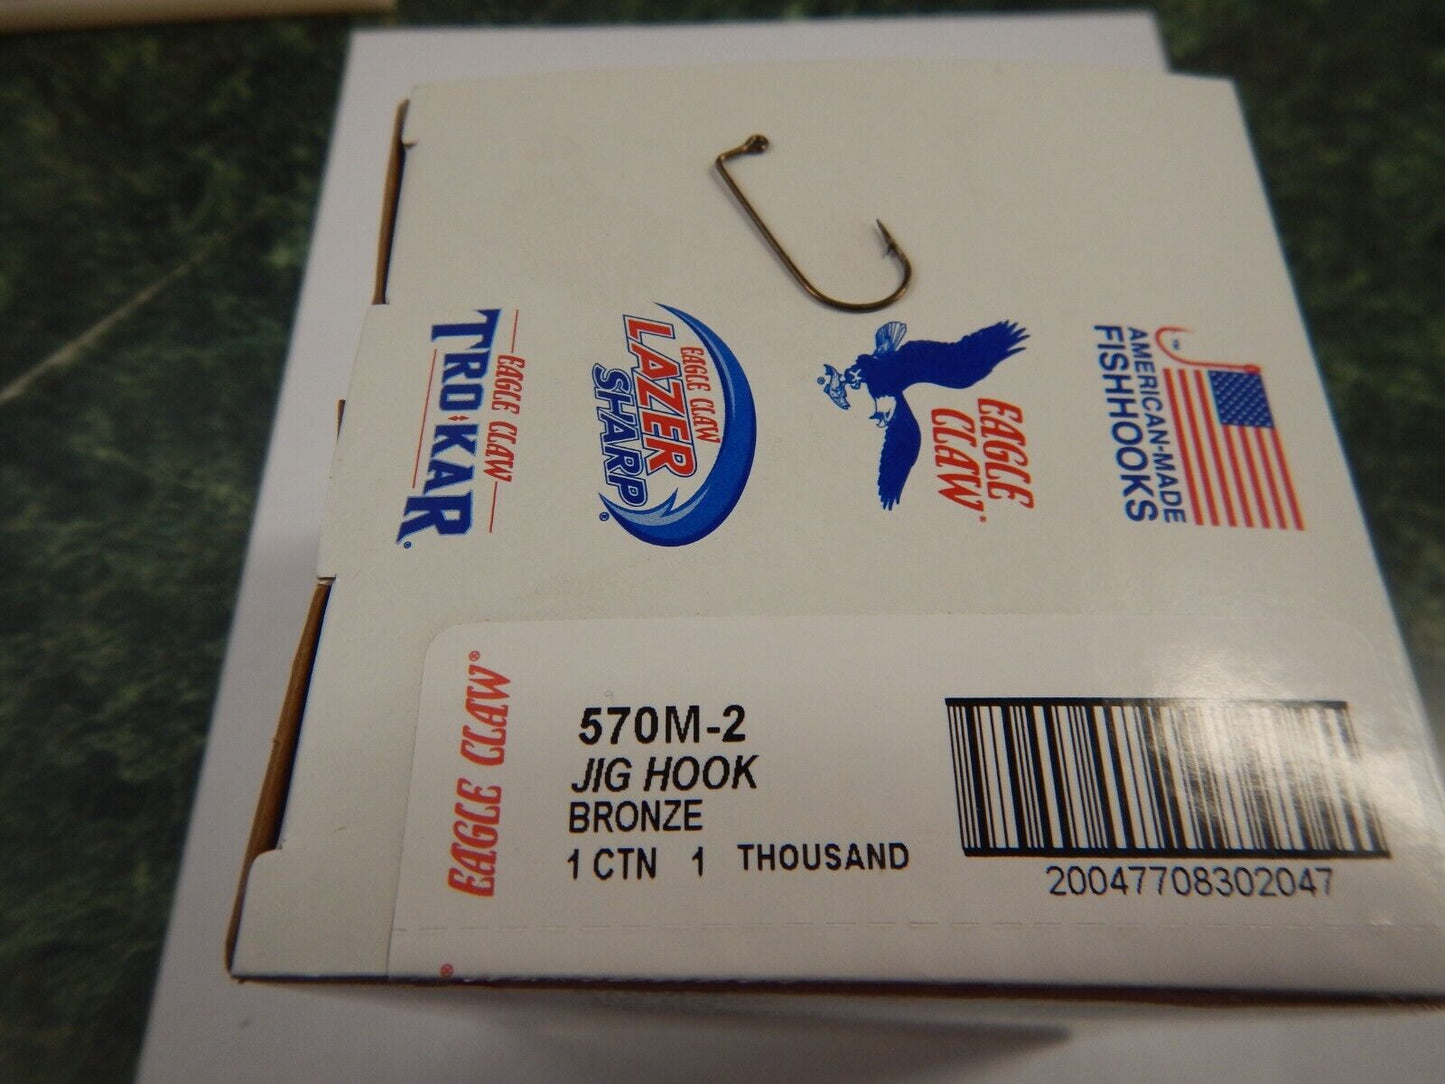 Eagle Claw 570M-2 Jig Hook Bronze 1000 count